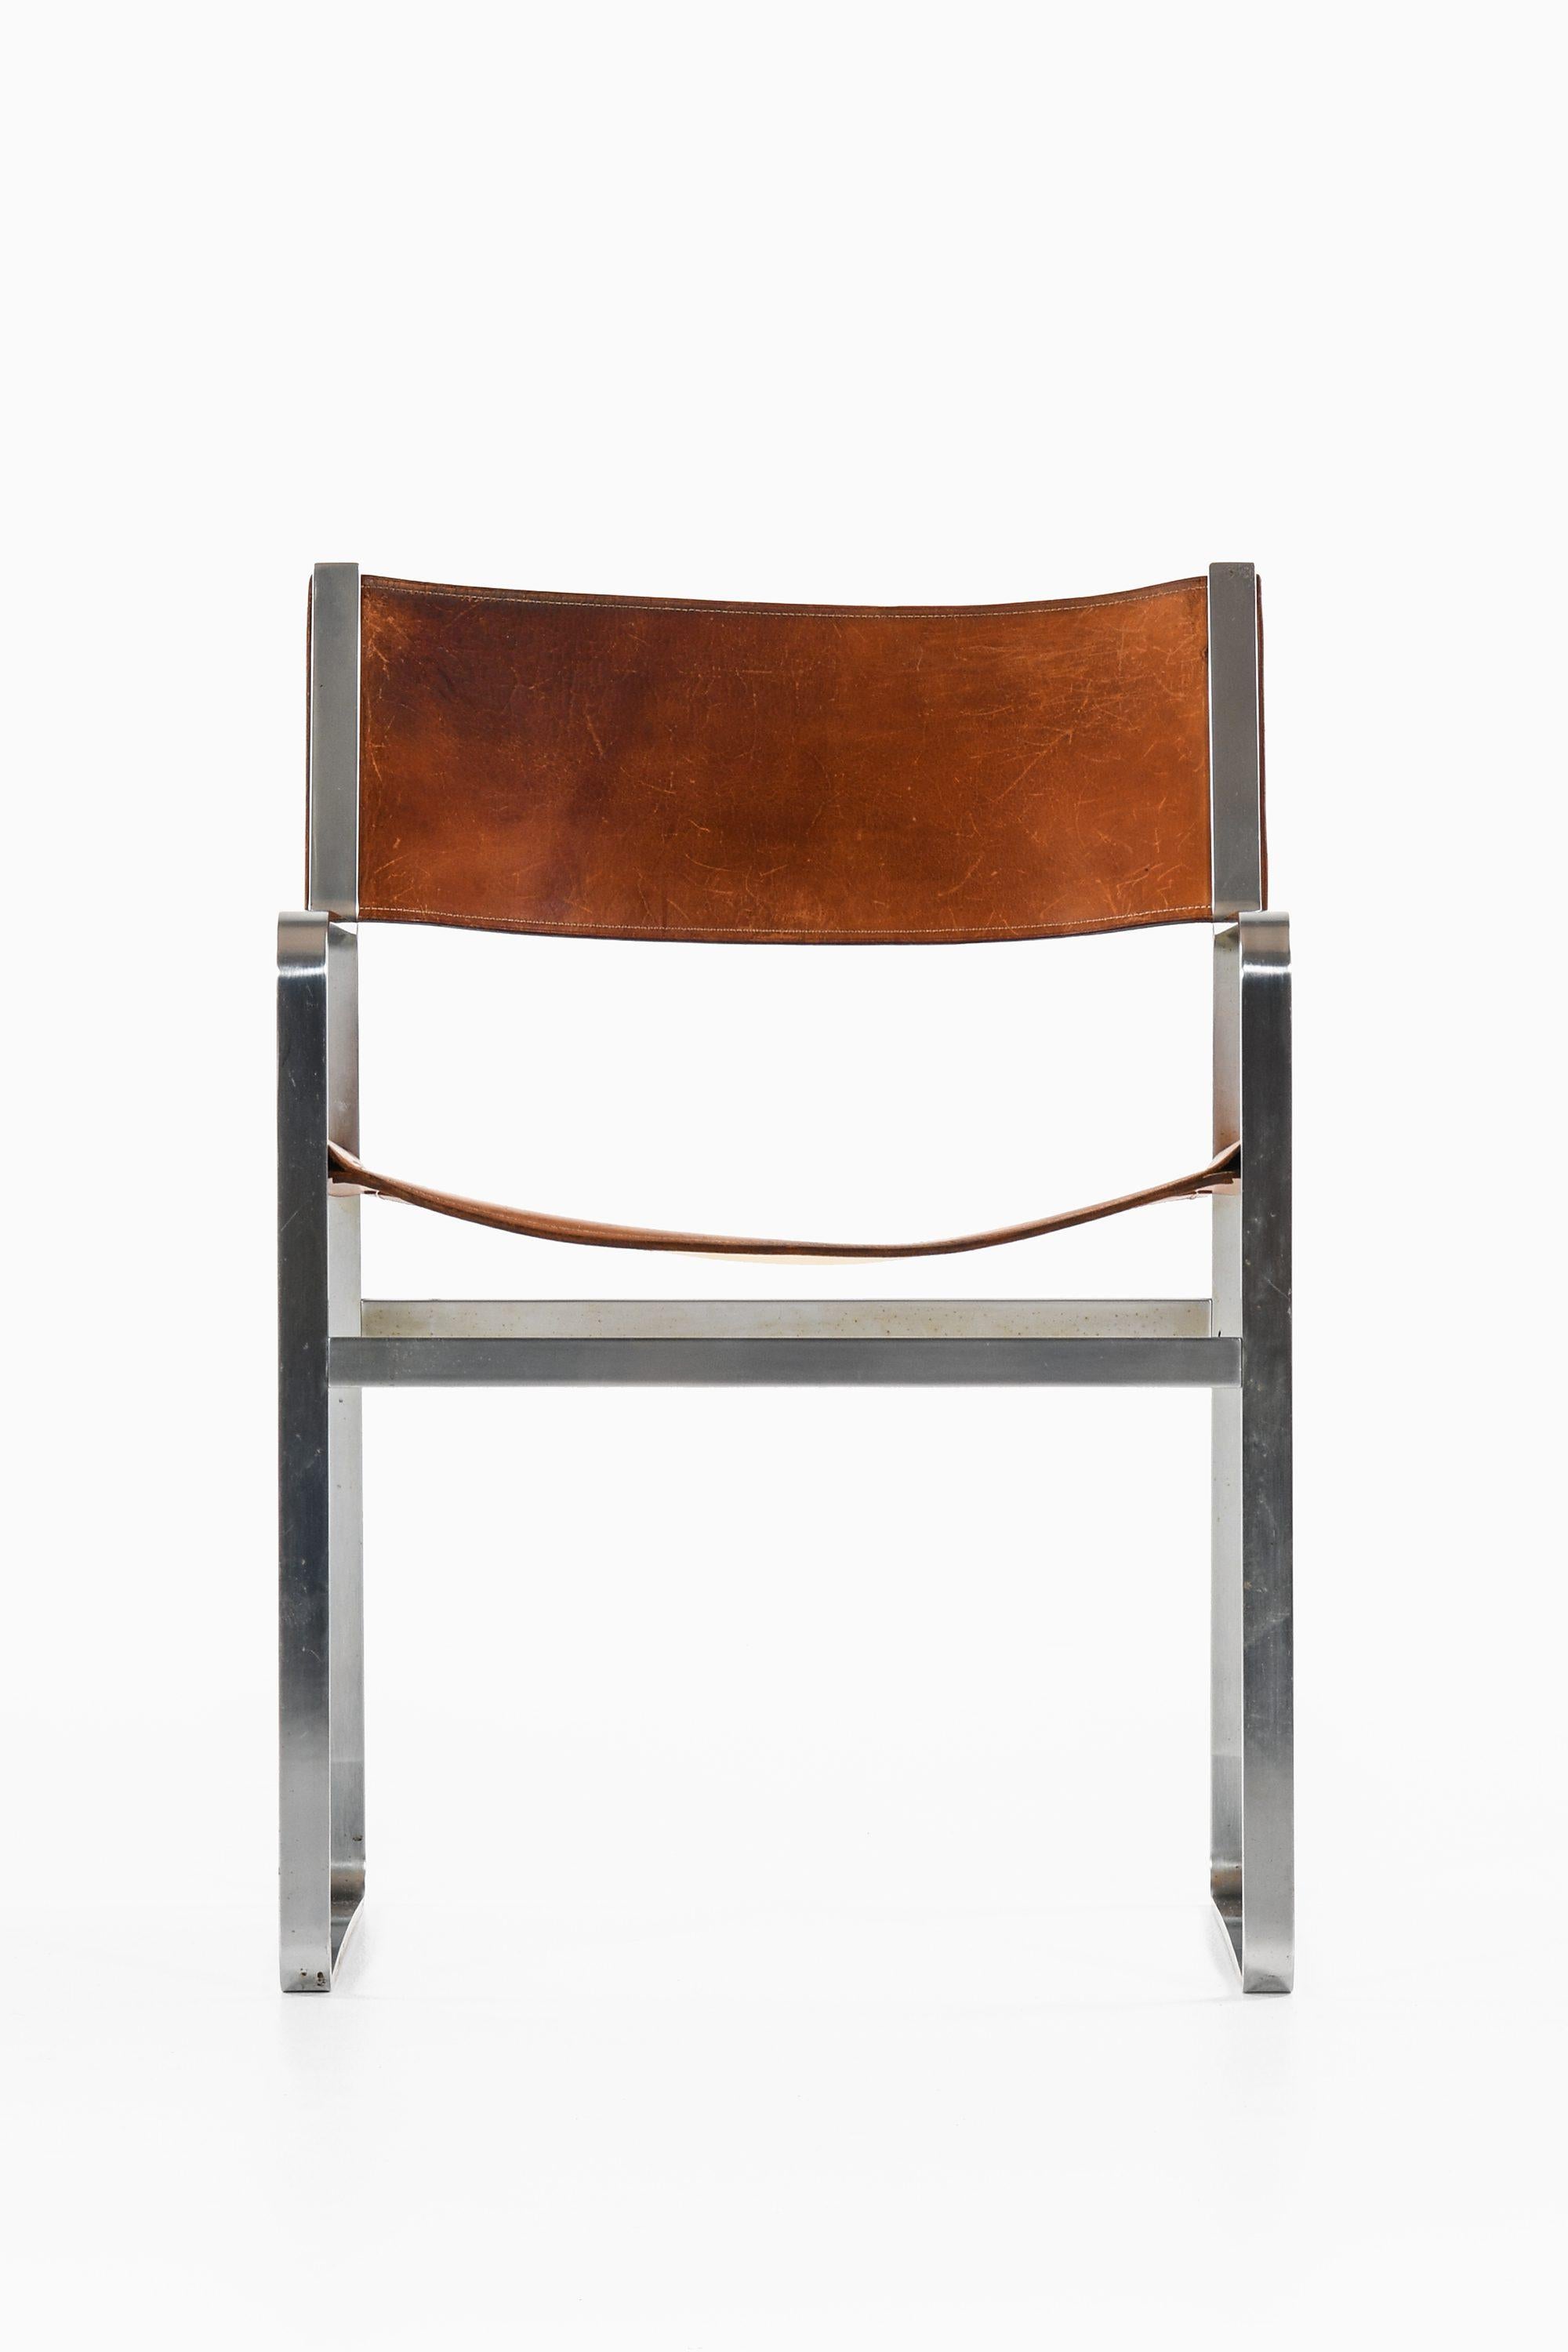 Armchair in Steel and Original Leather by Hans Wegner, 1970s

Additional Information:
Material: Steel and original leather
Style: midcentury, Scandinavian
Rare Armchair Model JH-813
Produced by cabinetmaker Johannes Hansen in